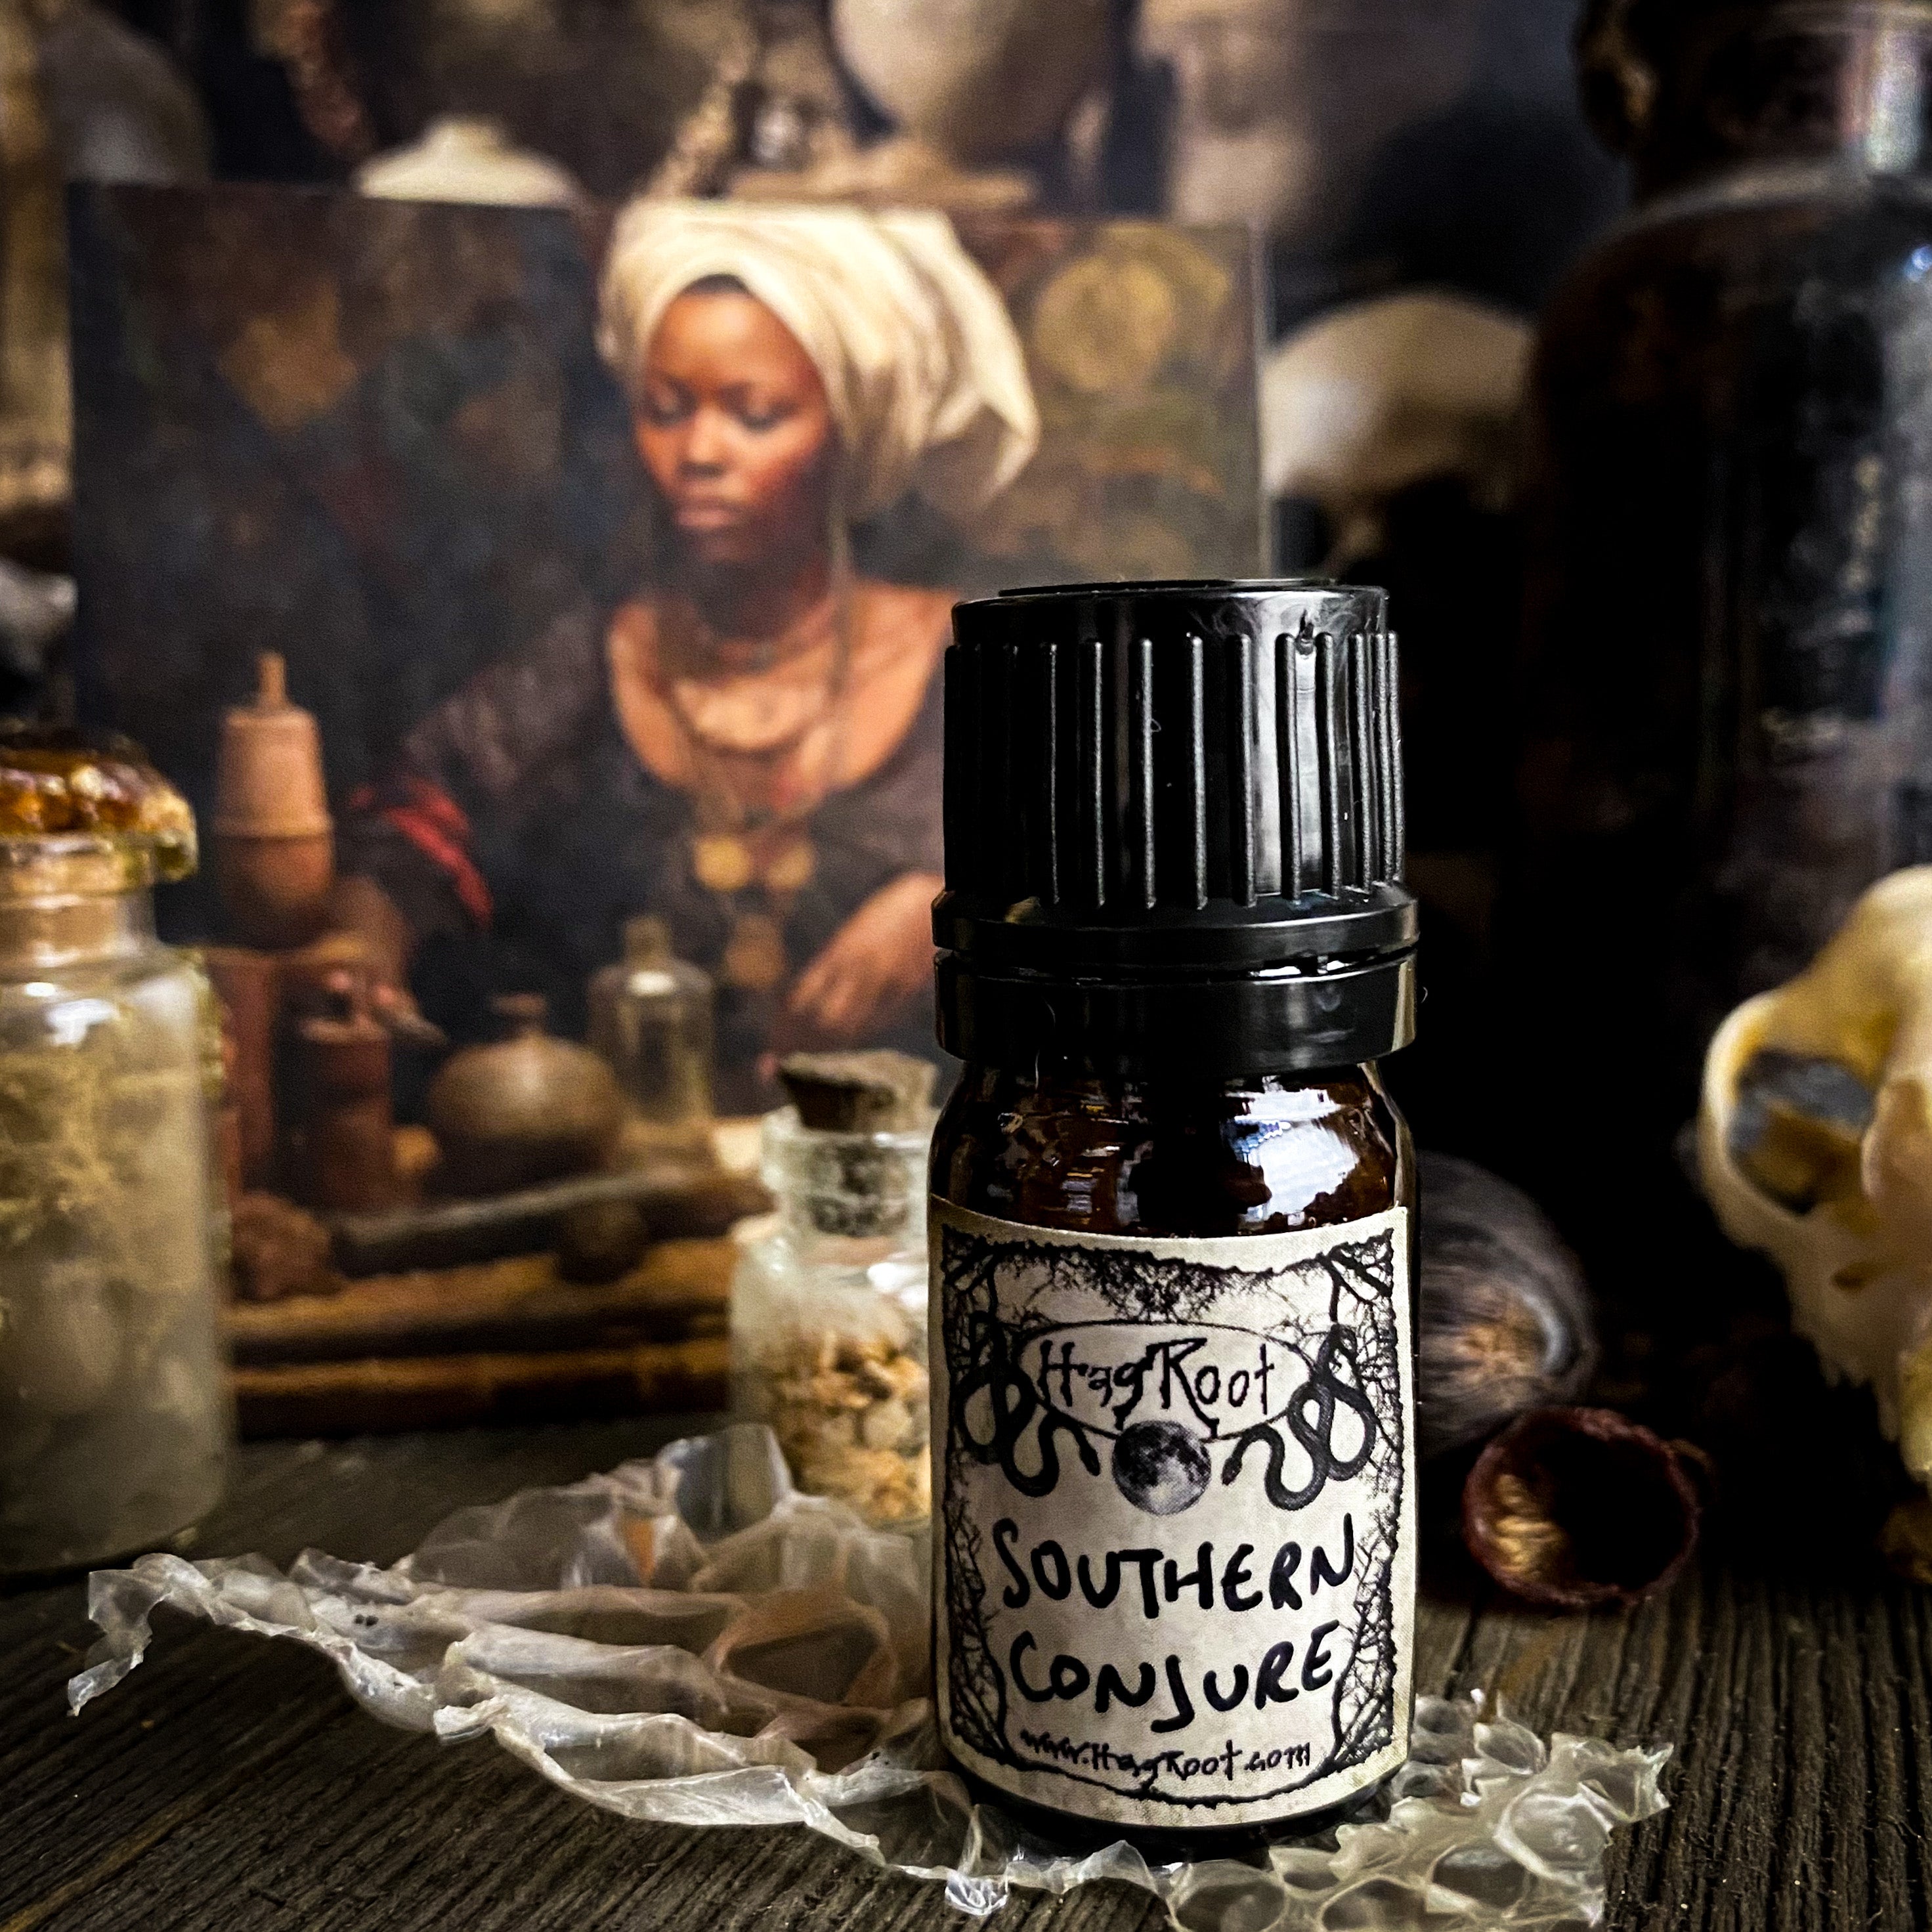 SOUTHERN CONJURE-(Magnolia Blossoms, Cypress, Spanish Moss, Charred Ritual Wood)-Perfume, Cologne, Anointing, Ritual Oil